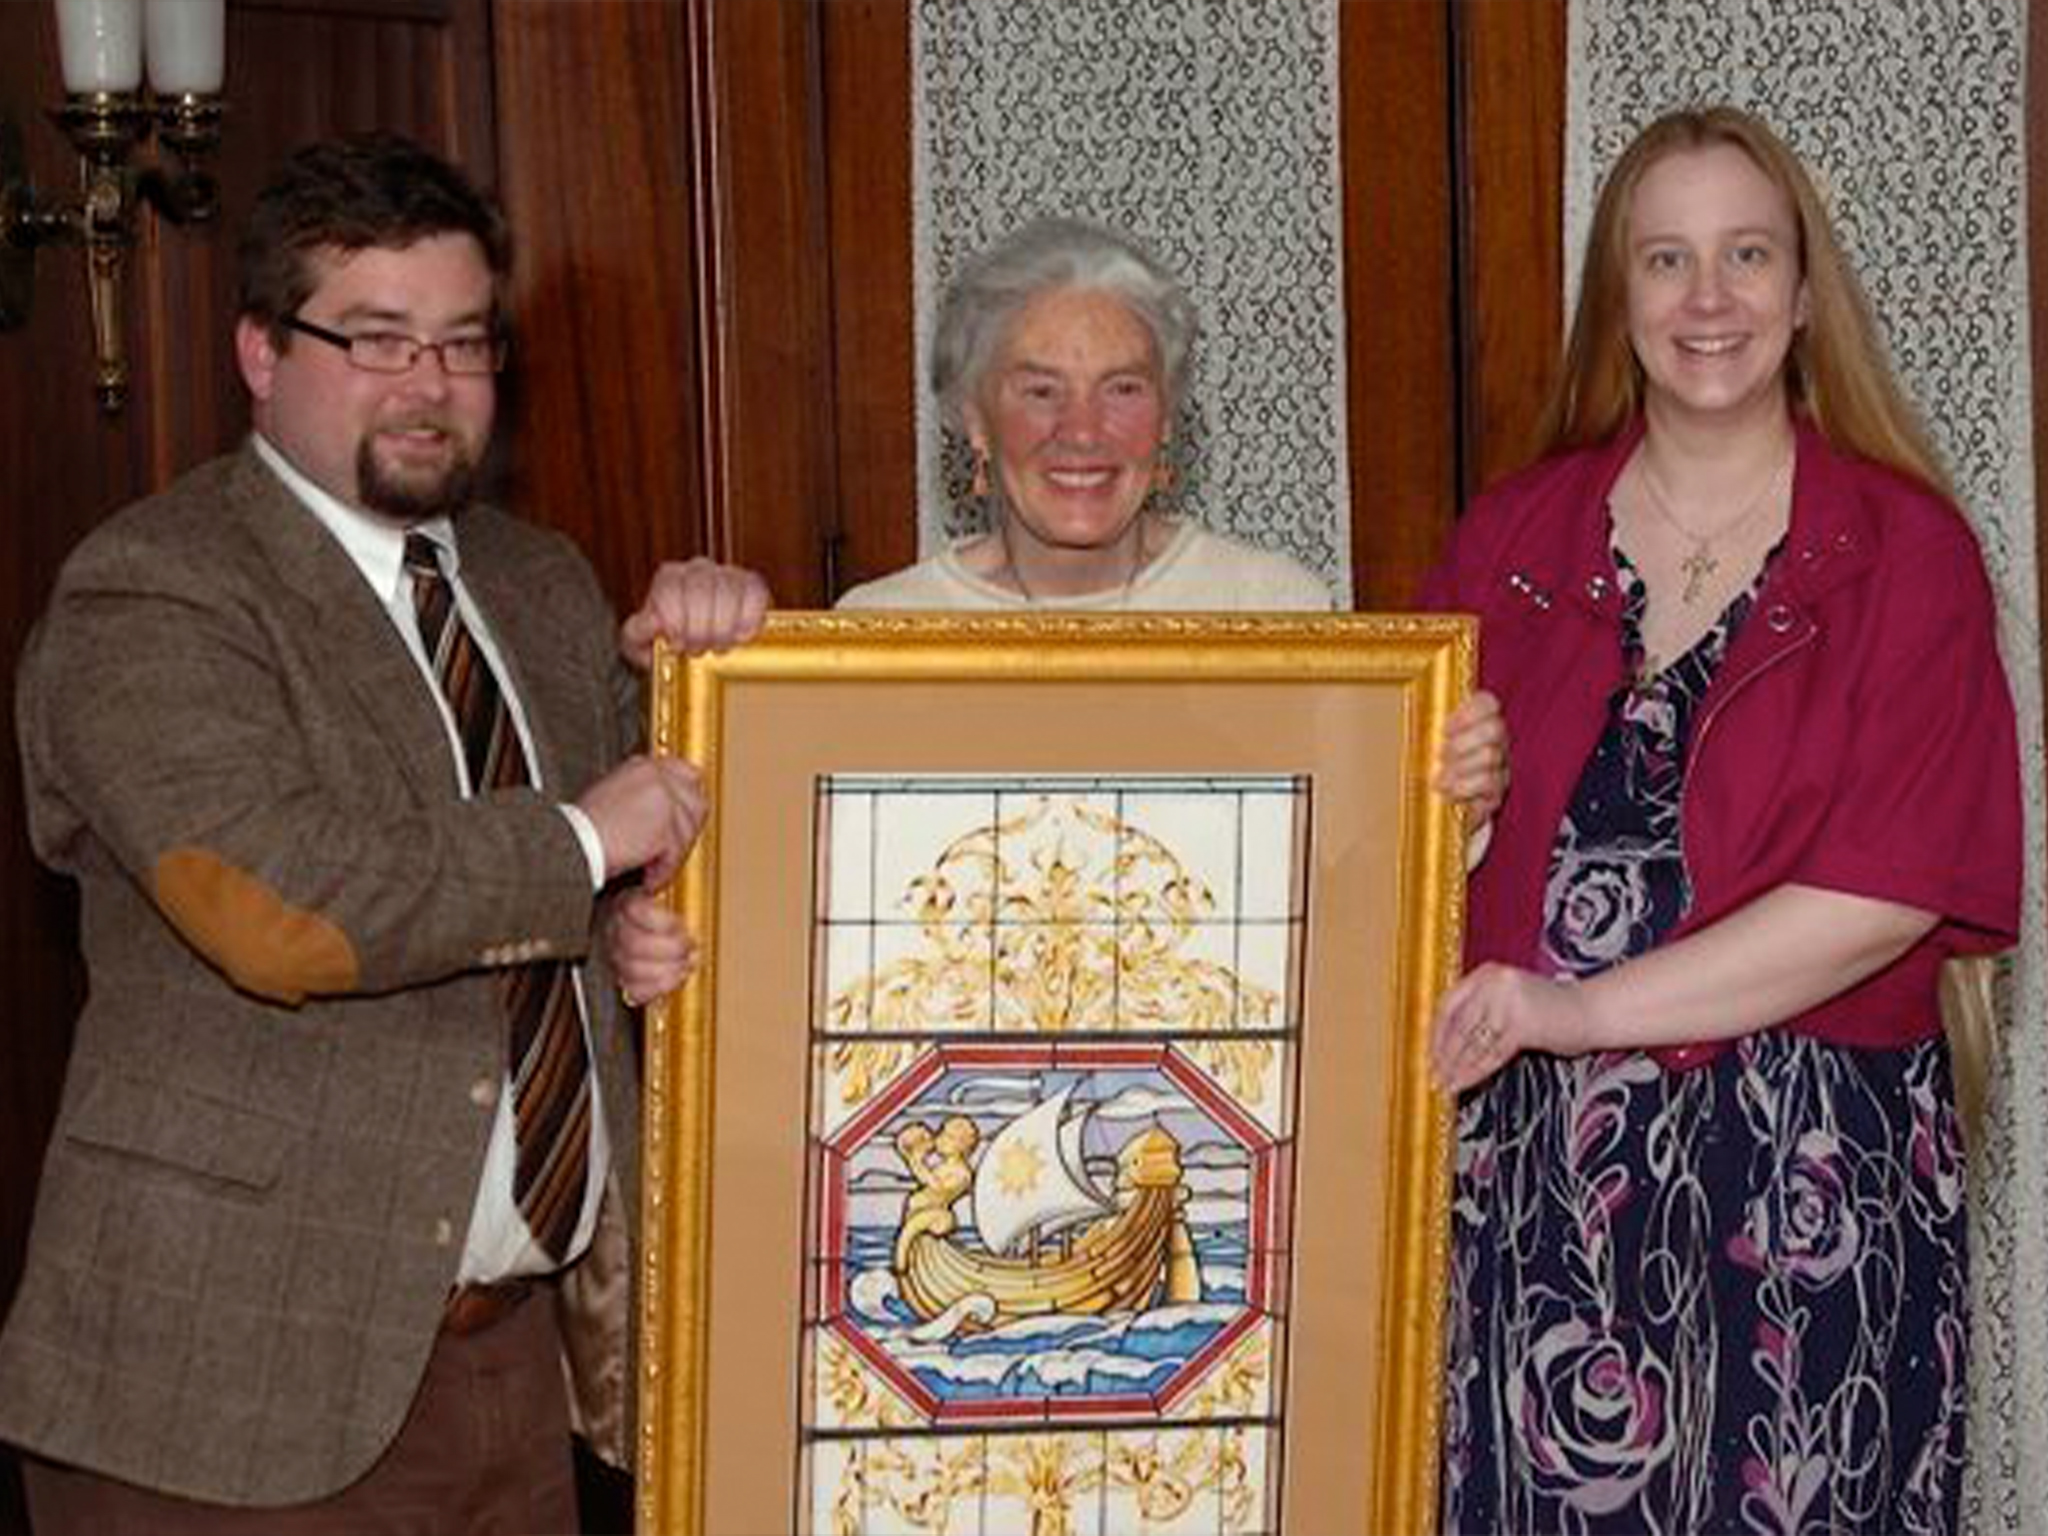 Recognized for her work in preserving numerous historic homes throughout Wheeling, as well as her work with Beverly Fluty in preserving the Wheeling Suspension Bridge. Photo by Friends of Wheeling.